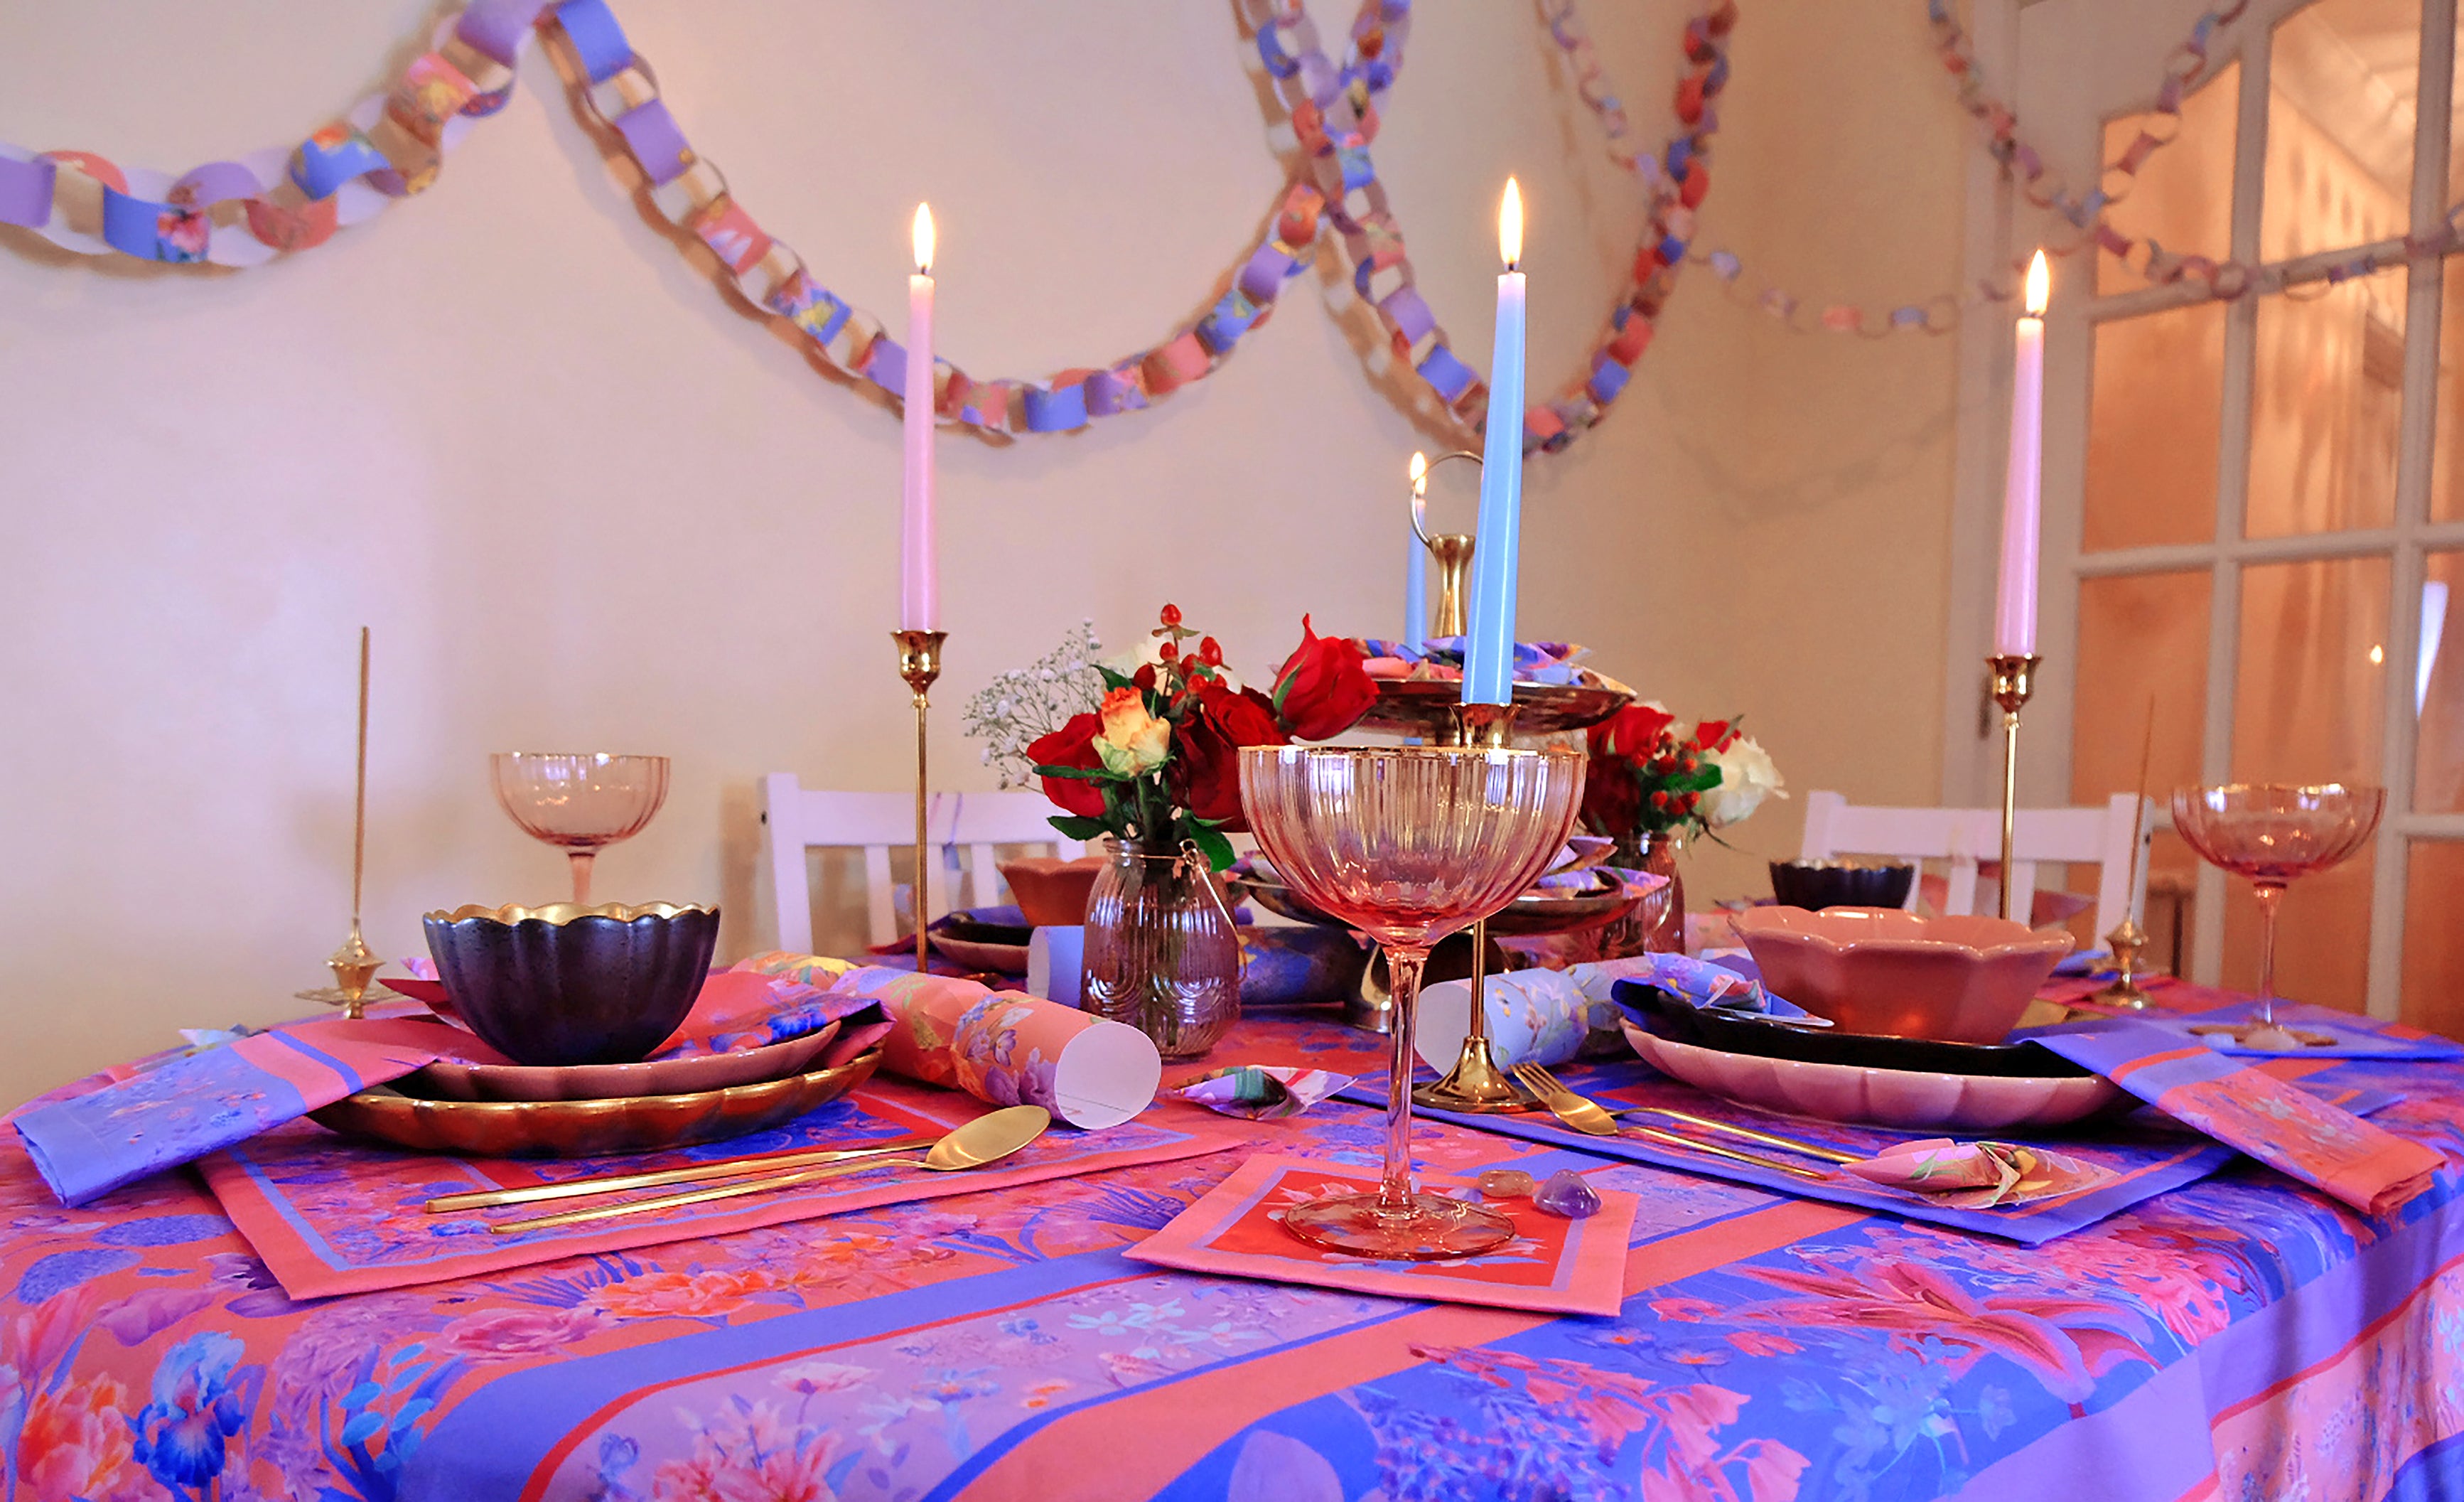 tablescape inspiration in blue, purple and pink for festive holidays